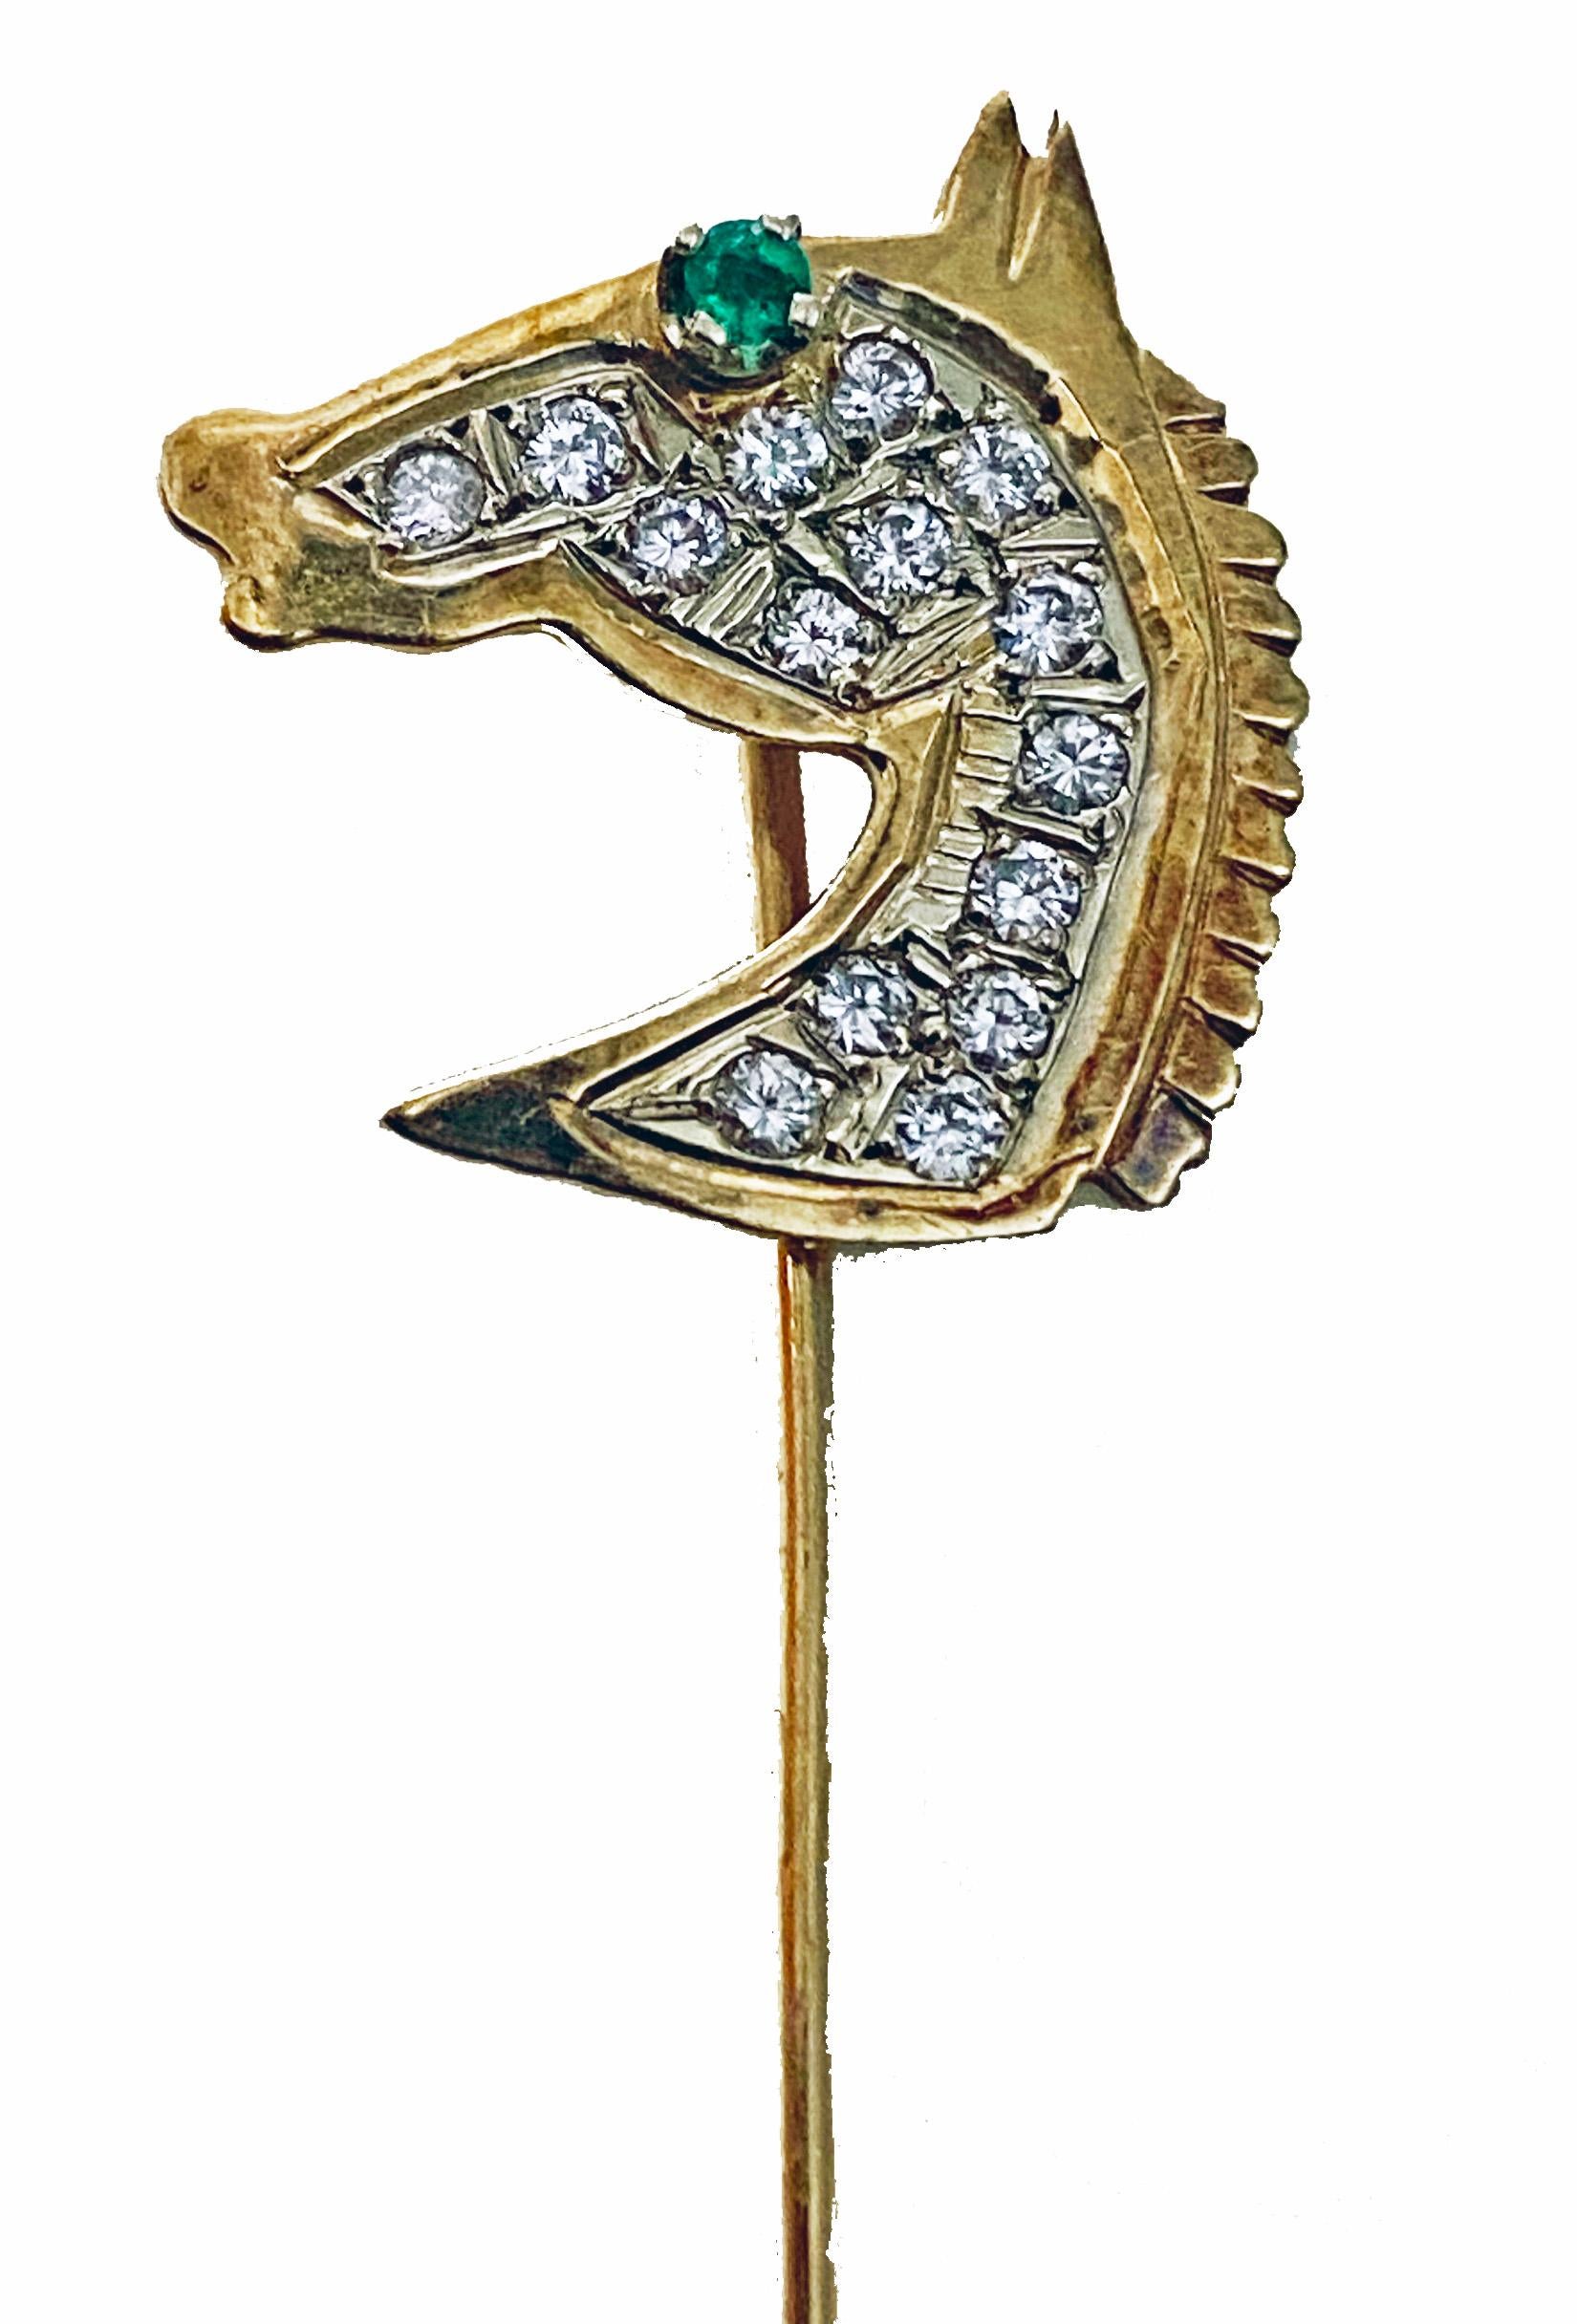 Gold Diamond Emerald Horses head Stickpin, 20th century. The head set with fifteen small round full cut diamond and the eye with small round faceted emerald. Gold acid tested 14K. Length of pin: 2 inches. Horse head measures: 17 x 16.5 mm. Total